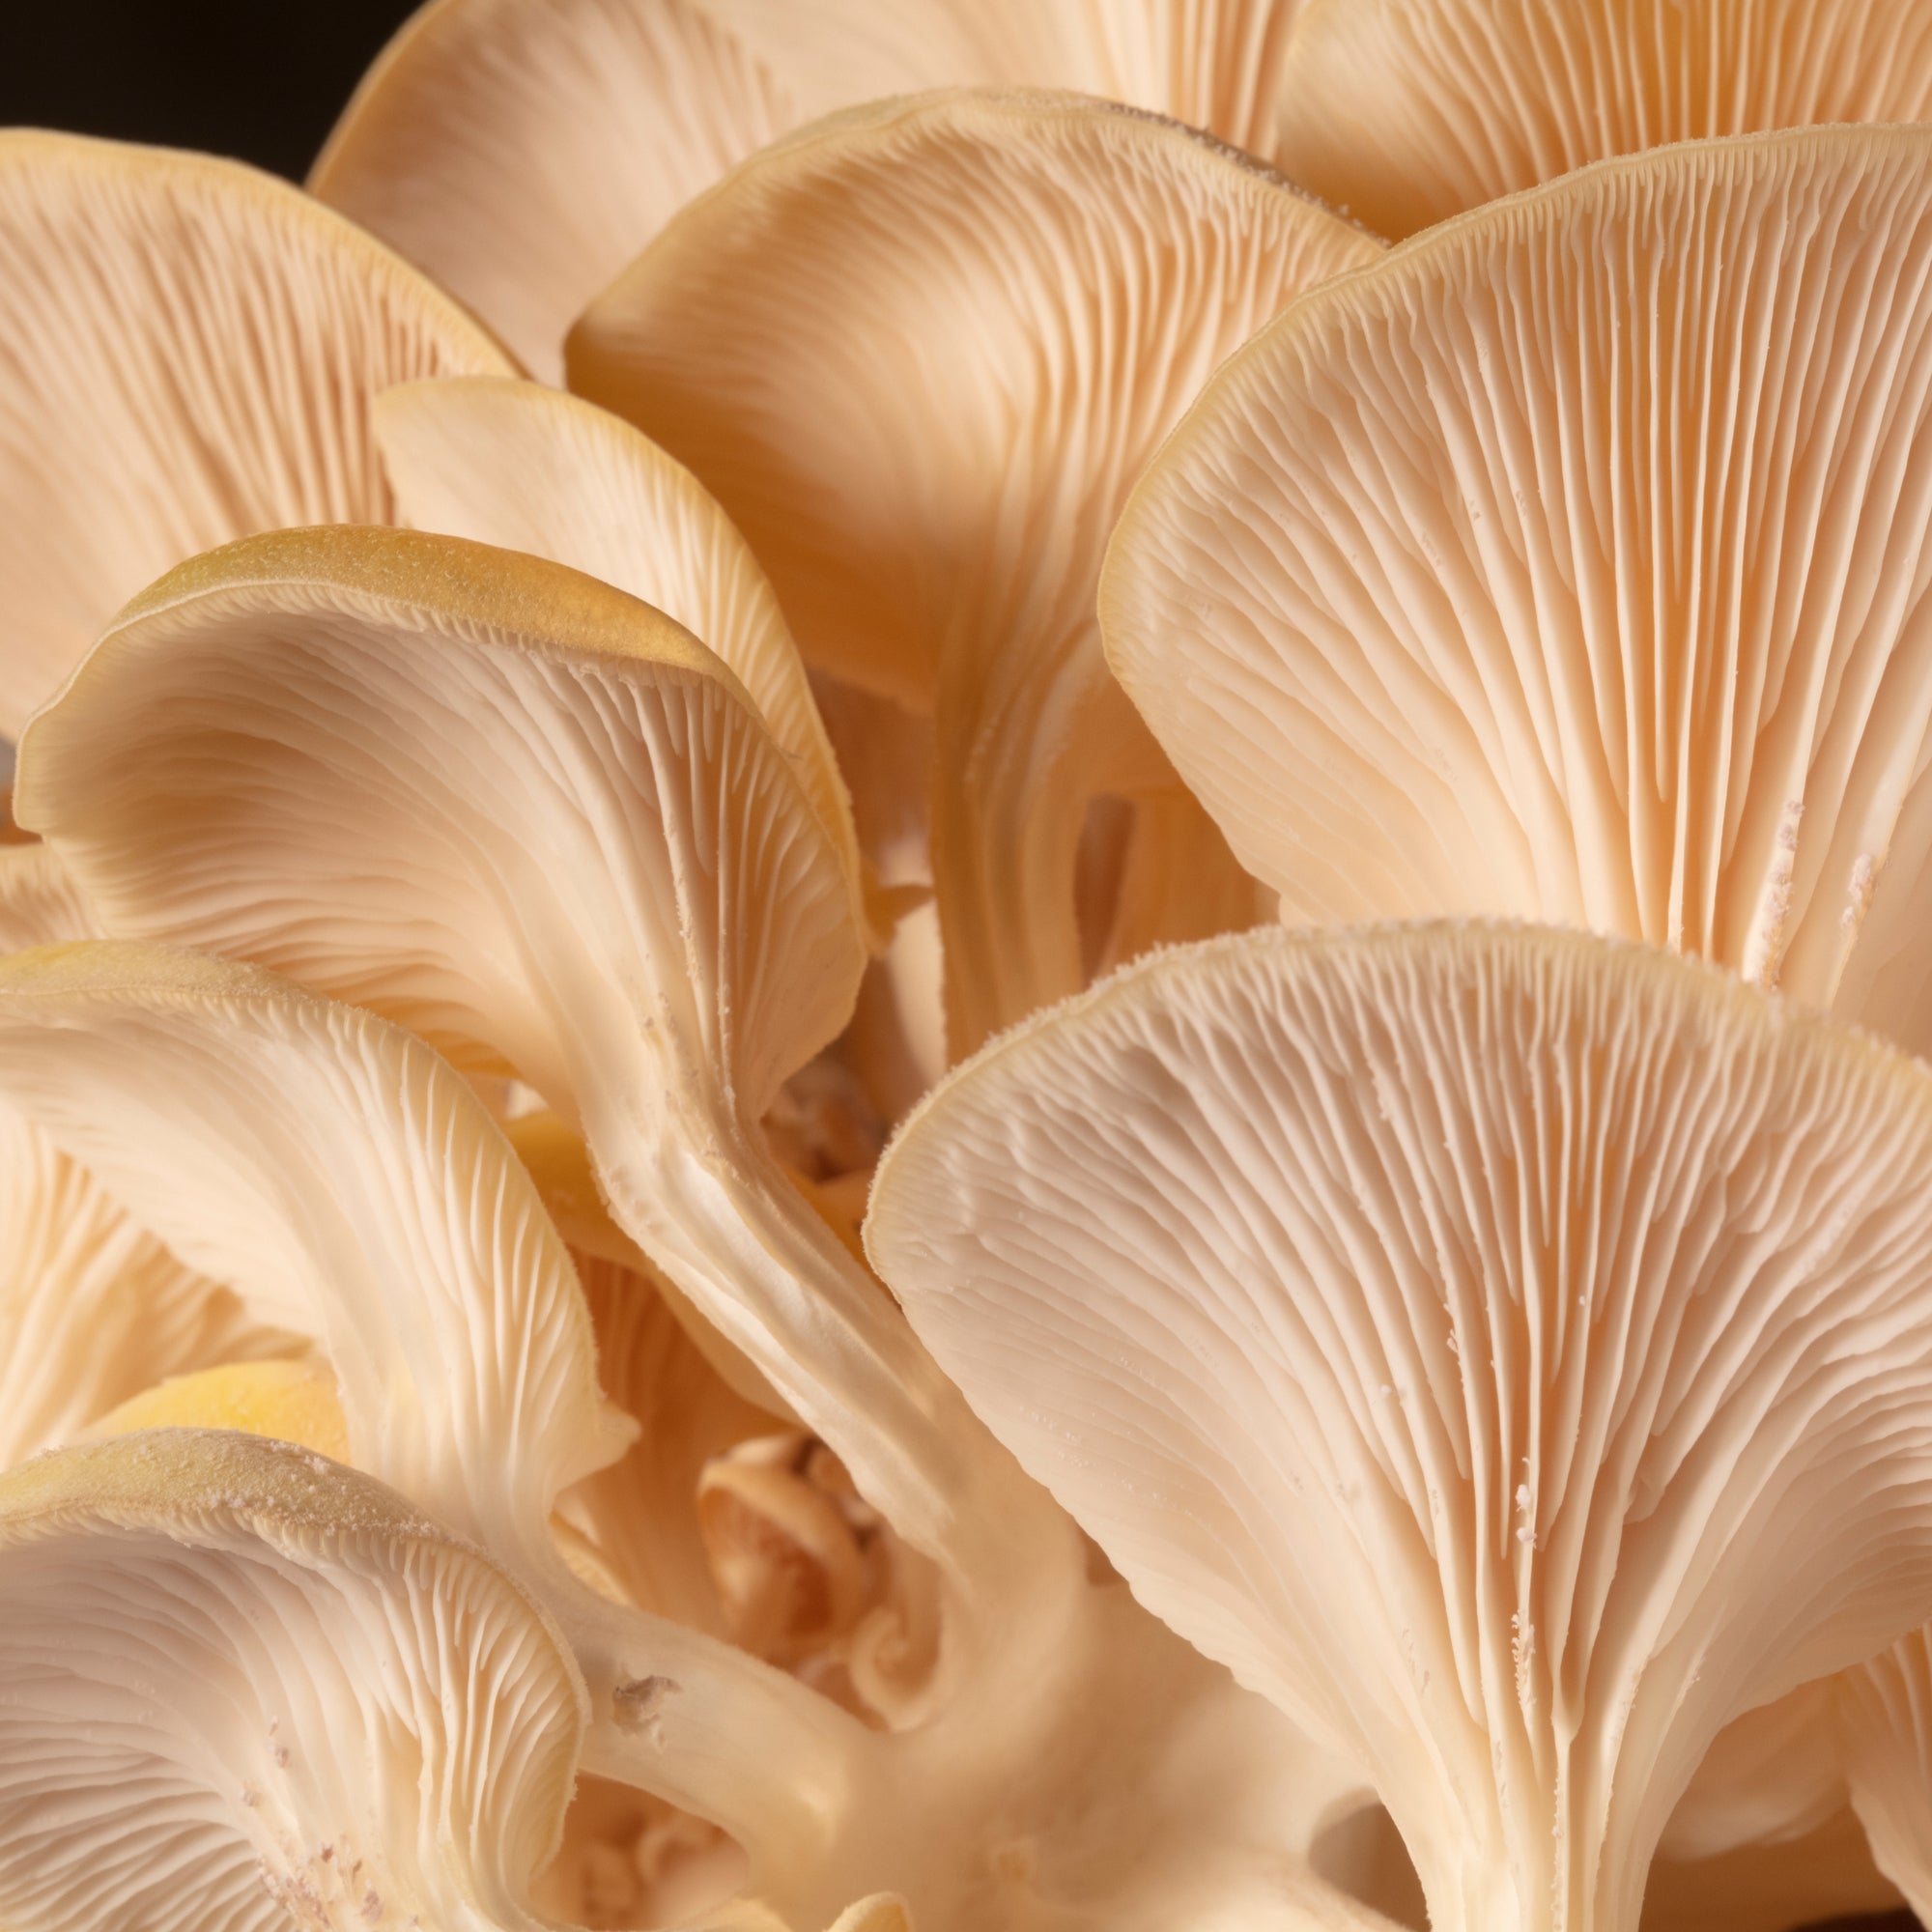 Meet Your Mushrooms: Get to Know 10 of Our Favorites